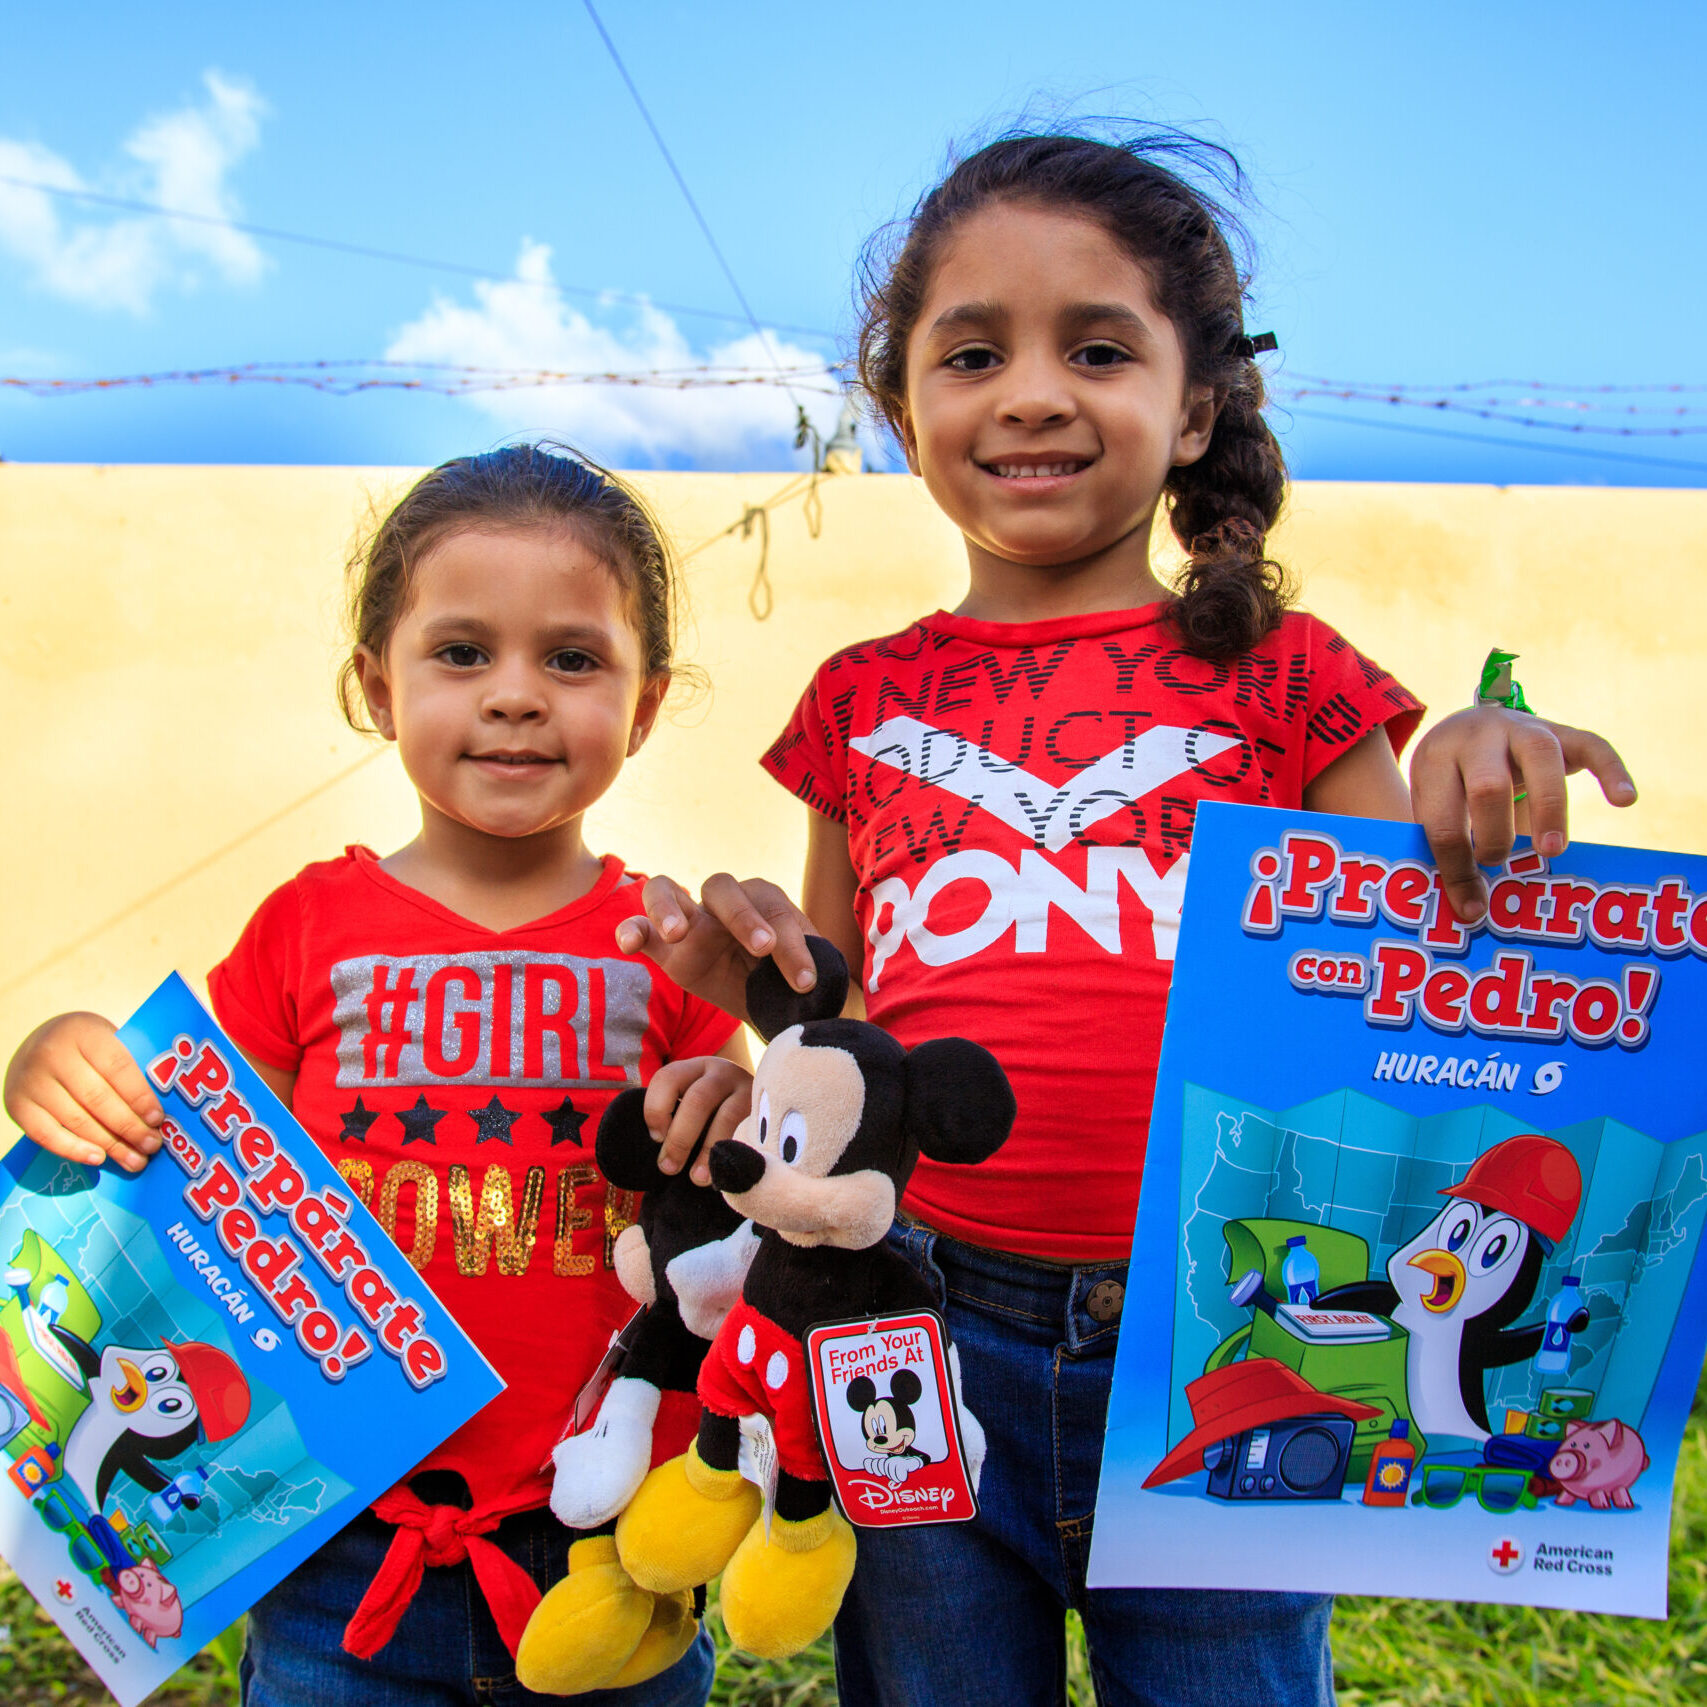 January 10, 2020. Refugio Ramón Baldorioty de Castro, Ponce, Puerto Rico. Sisters Reina Liz standing on the left, and Joslianys, standing on the right, told us how they participated in the Prepare with Pedro workshop and received a Mickey Mouse doll. Photo by Isaac León/American Red Cross